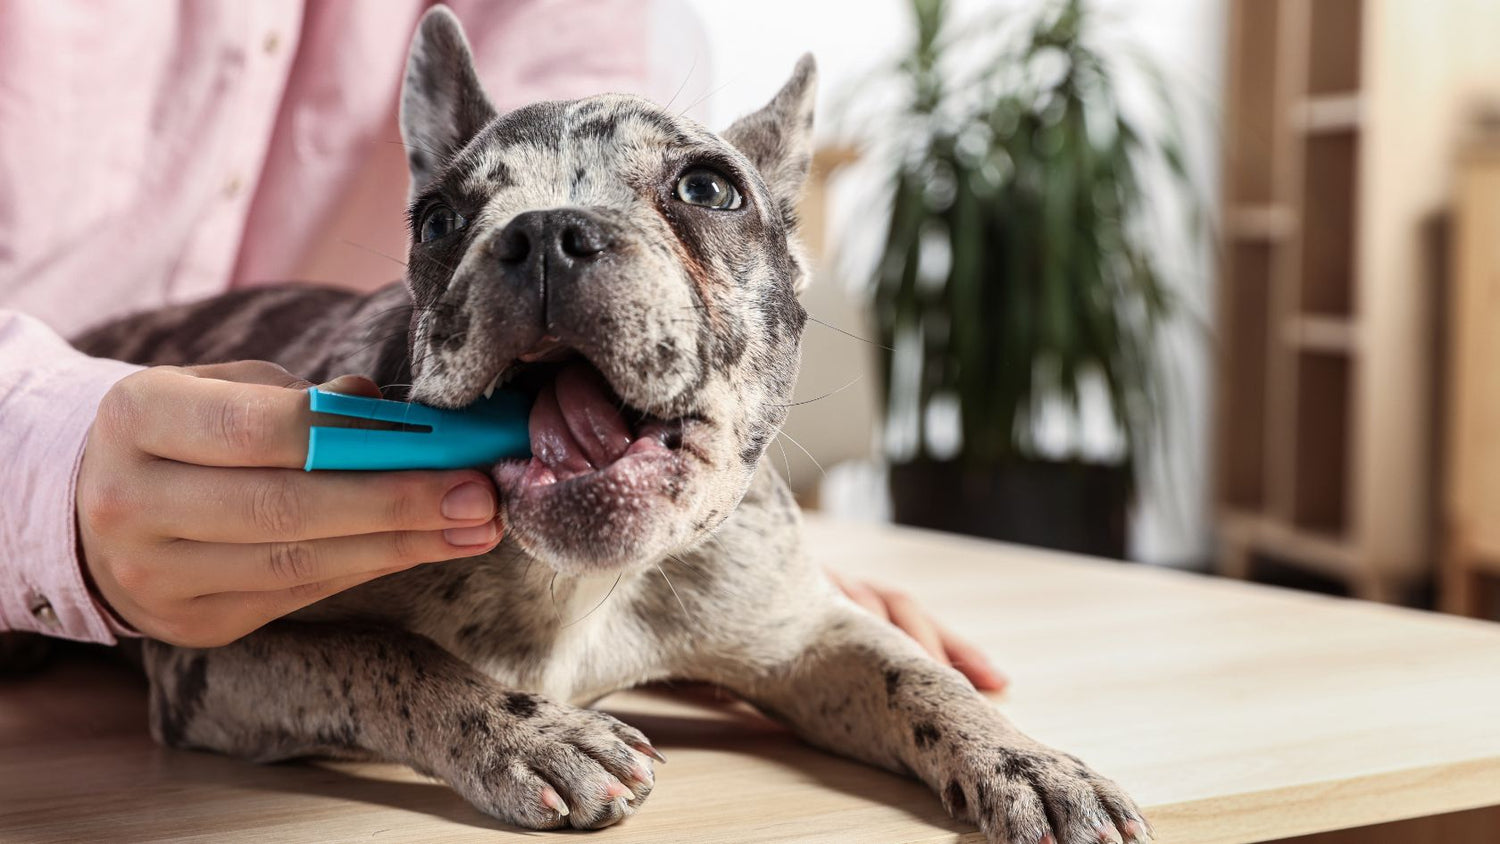 How to Brush Your Dog’s Teeth | 6 Simple Steps to Cleaner, Healthier Teeth